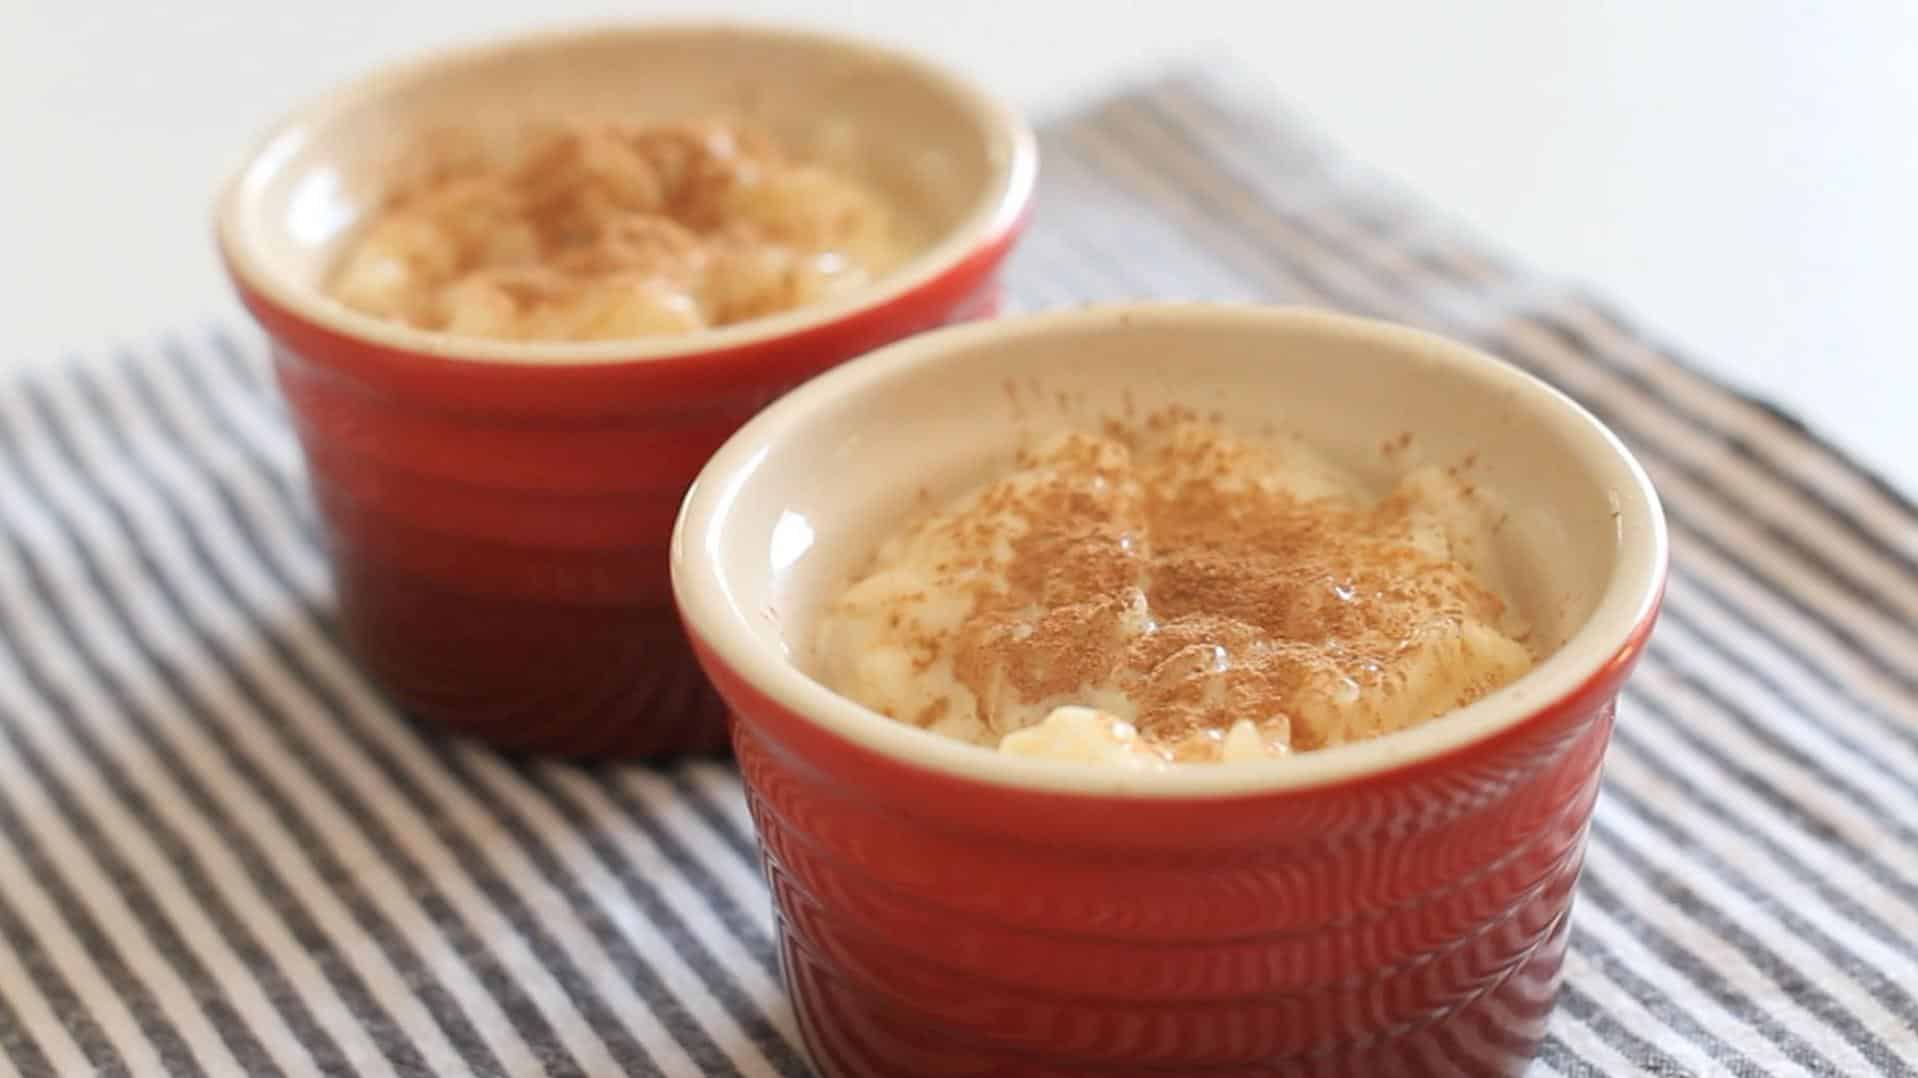  You won't be able to resist the velvety texture of this pudding.